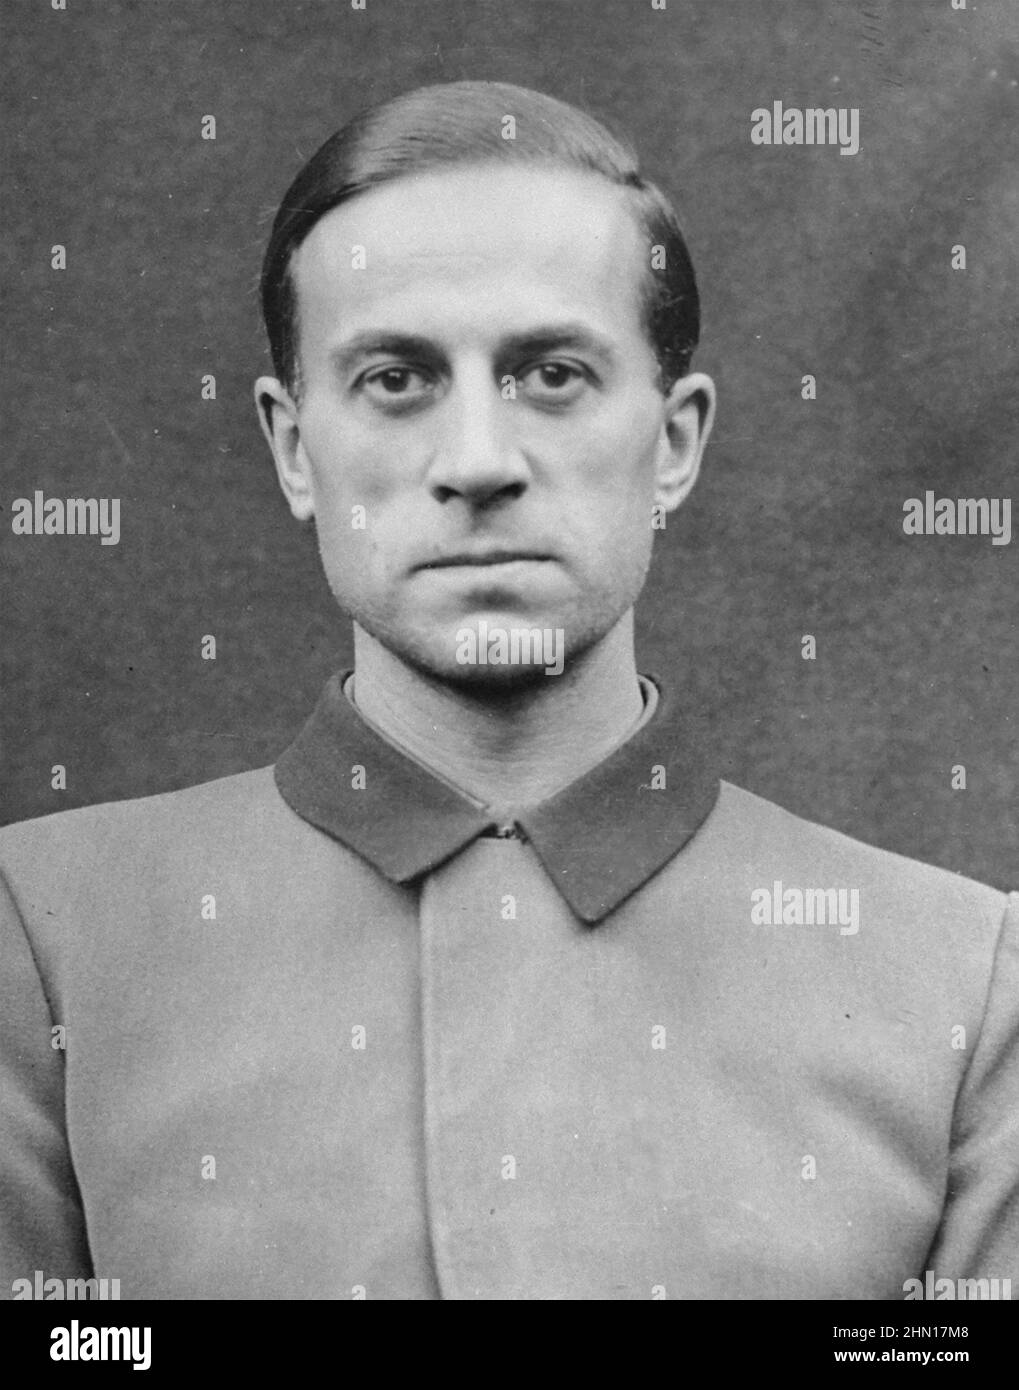 KARL BRANDT (1904-1948) German physician who became Hitler's doctor and was in charge of the Aktion T4 euthanasia programme. USArmy photo taken during the Doctors' Trial  1946-47. Stock Photo